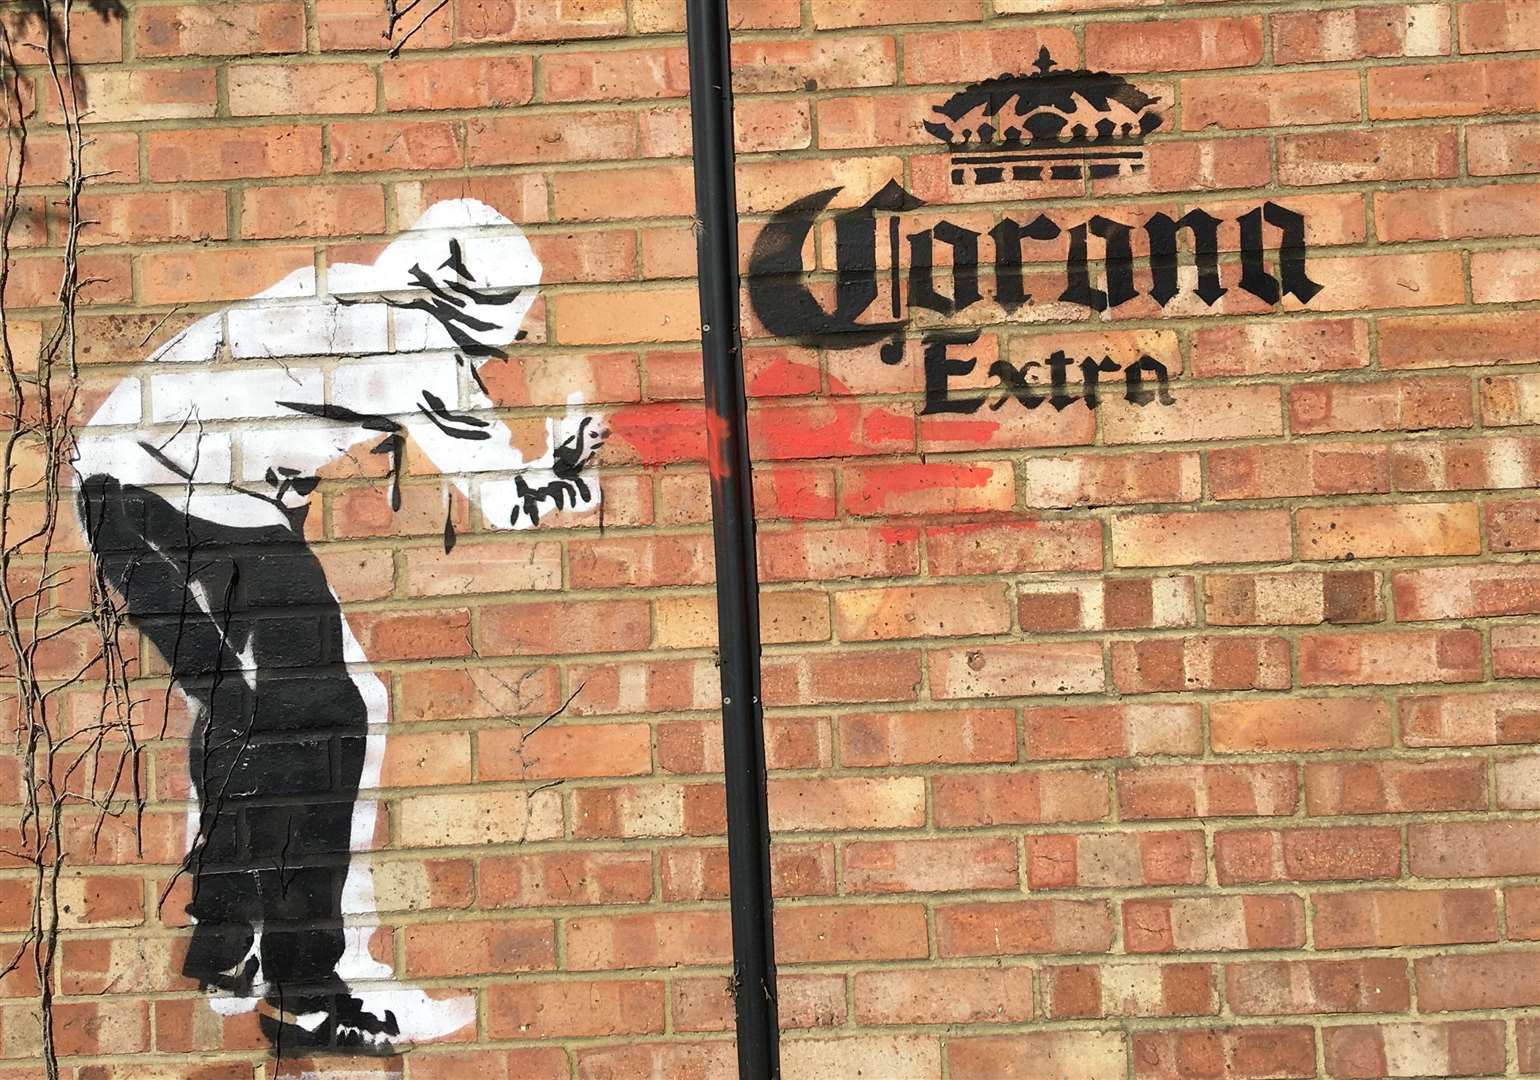 Could this artwork in Larkfield be Banksy?